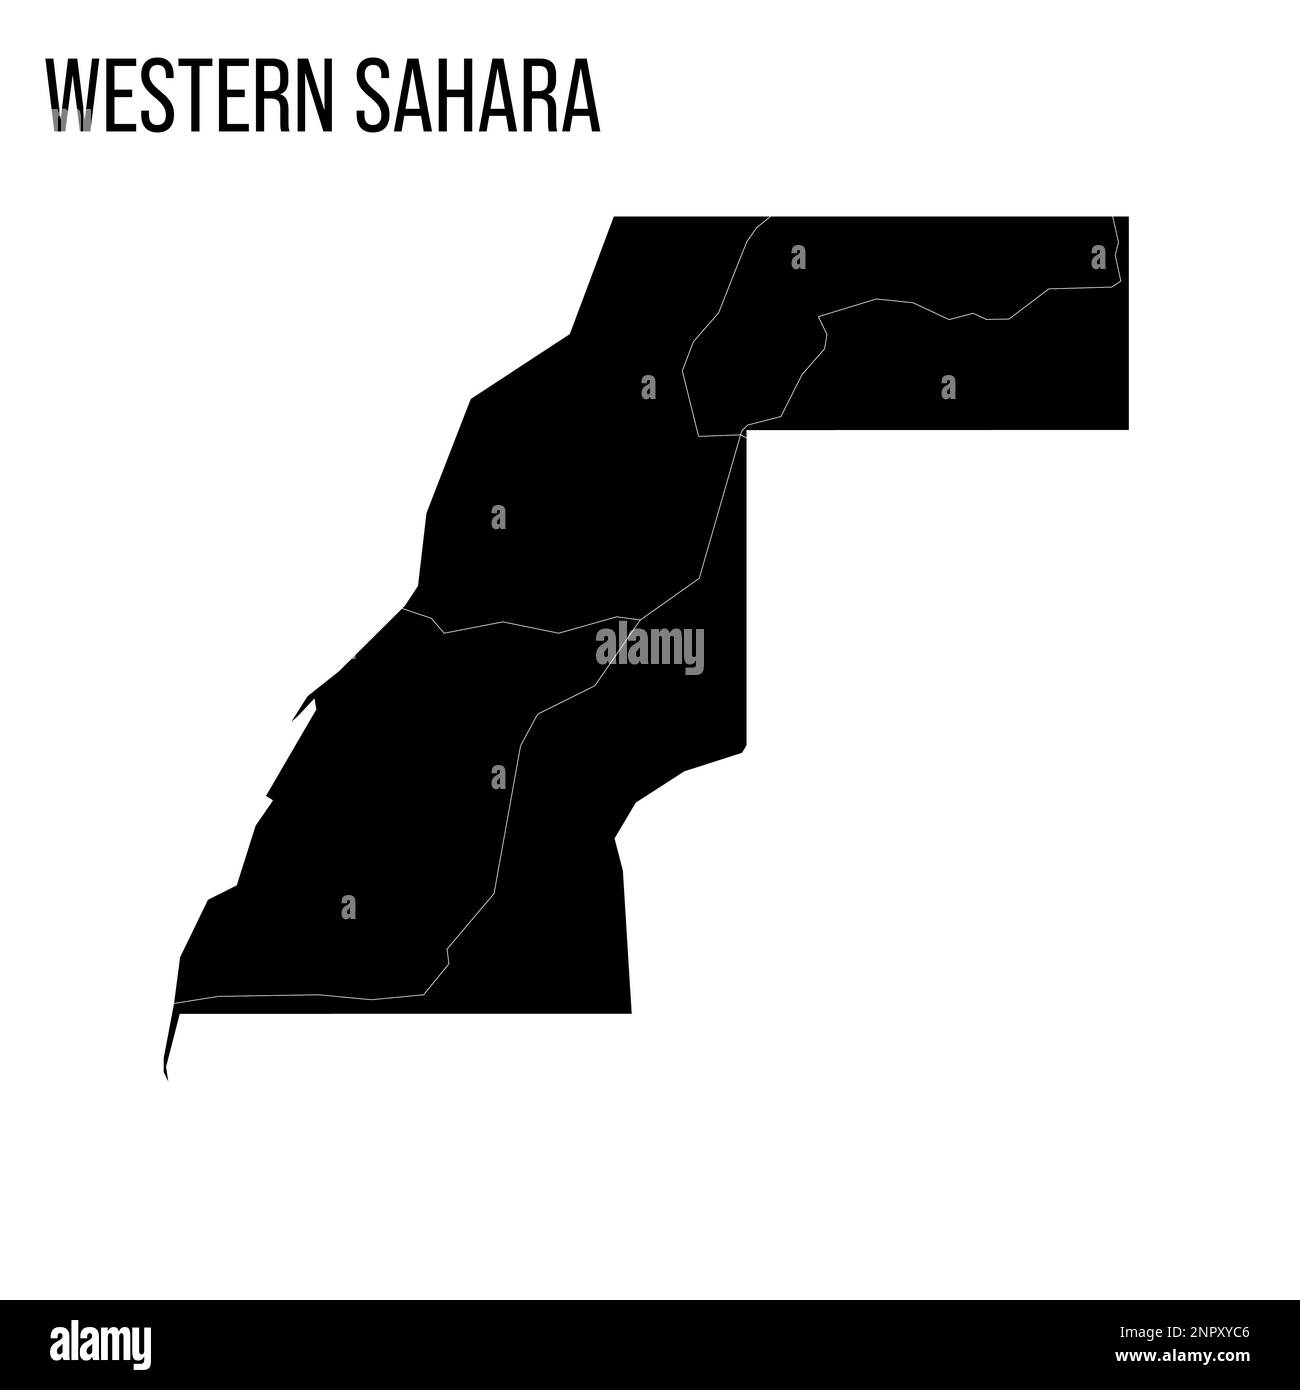 Western map of land divided between Morocco and Sahrawi Arab Democratic Republic by Moroccan Western Sahara Wall. Blank black map and country name title. Stock Vector